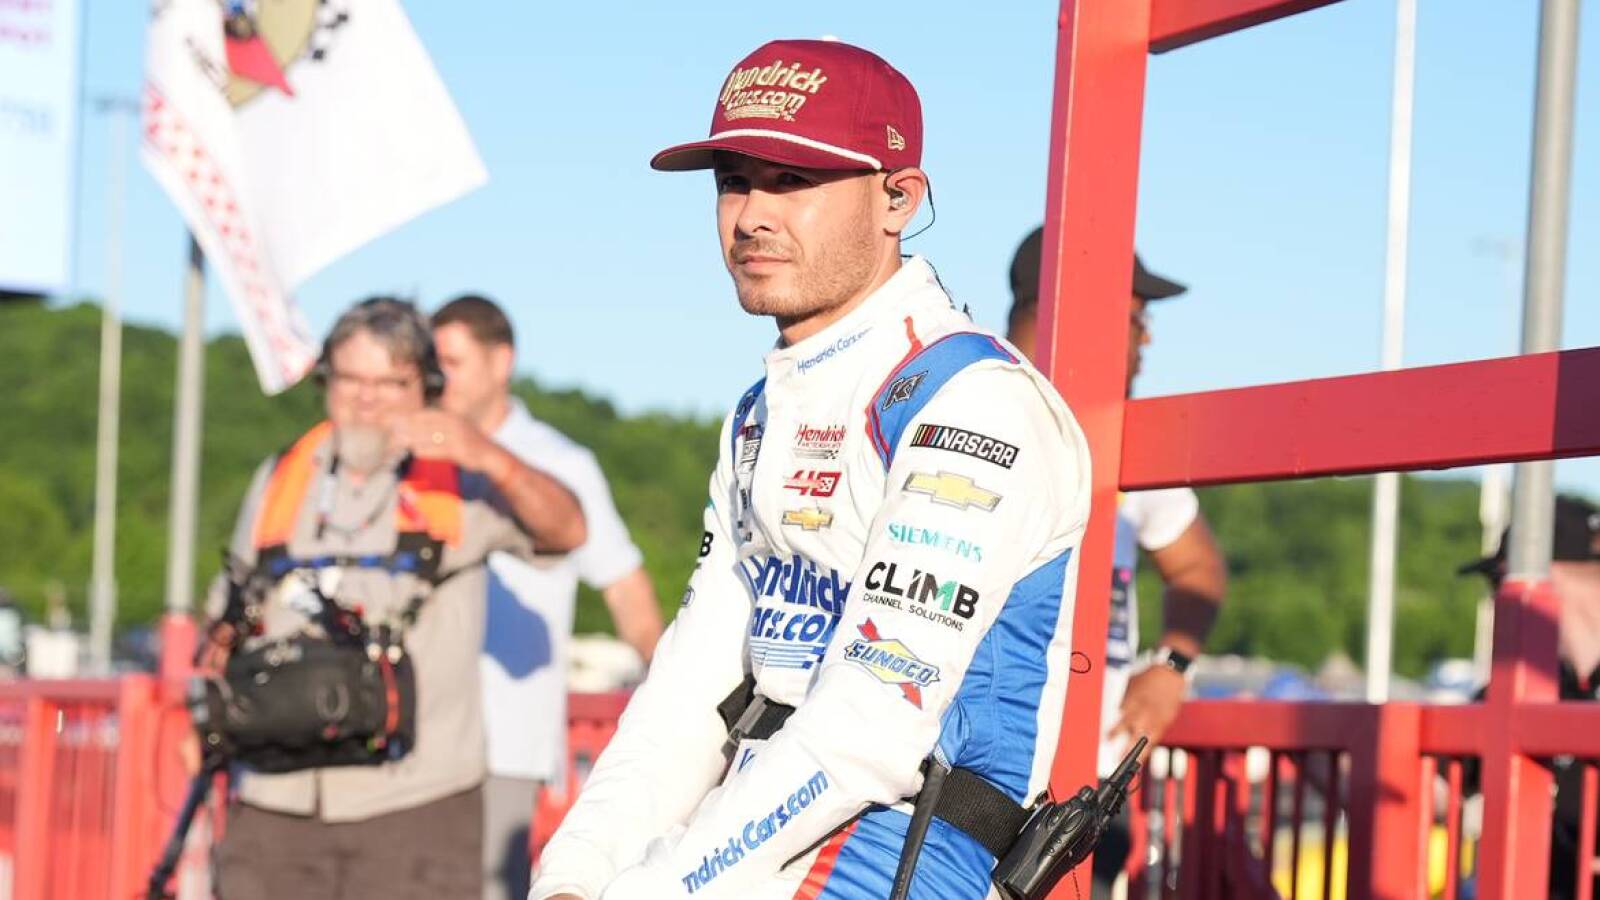 Watch: Kyle Larson arrived at NASCAR All-Star race in helicopter